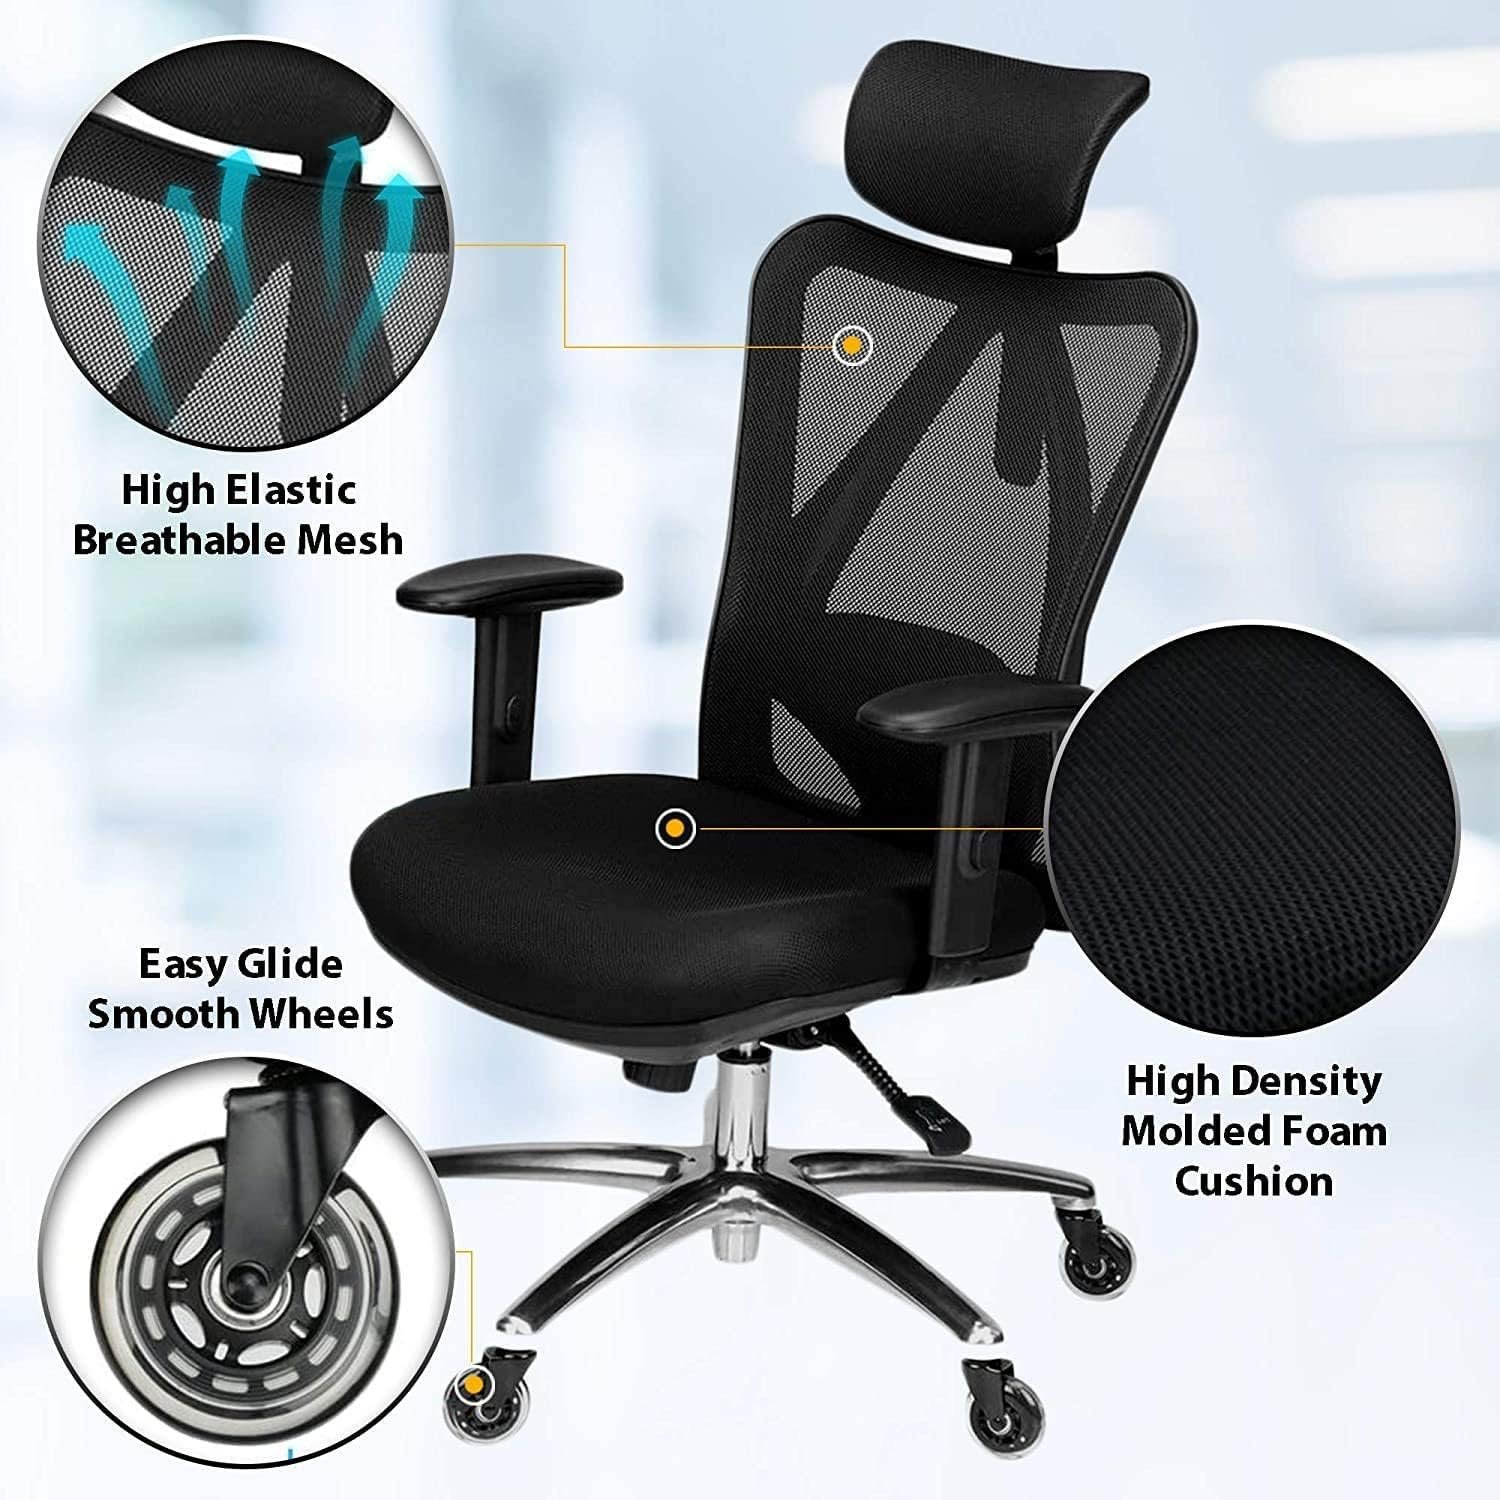 Duramont Ergonomic Office Chair - Adjustable Desk Chair with Lumbar Support and Rollerblade Wheels - High Back Chairs with Breathable Mesh - Thick Seat Cushion, Head, and Arm Rests - Reclines